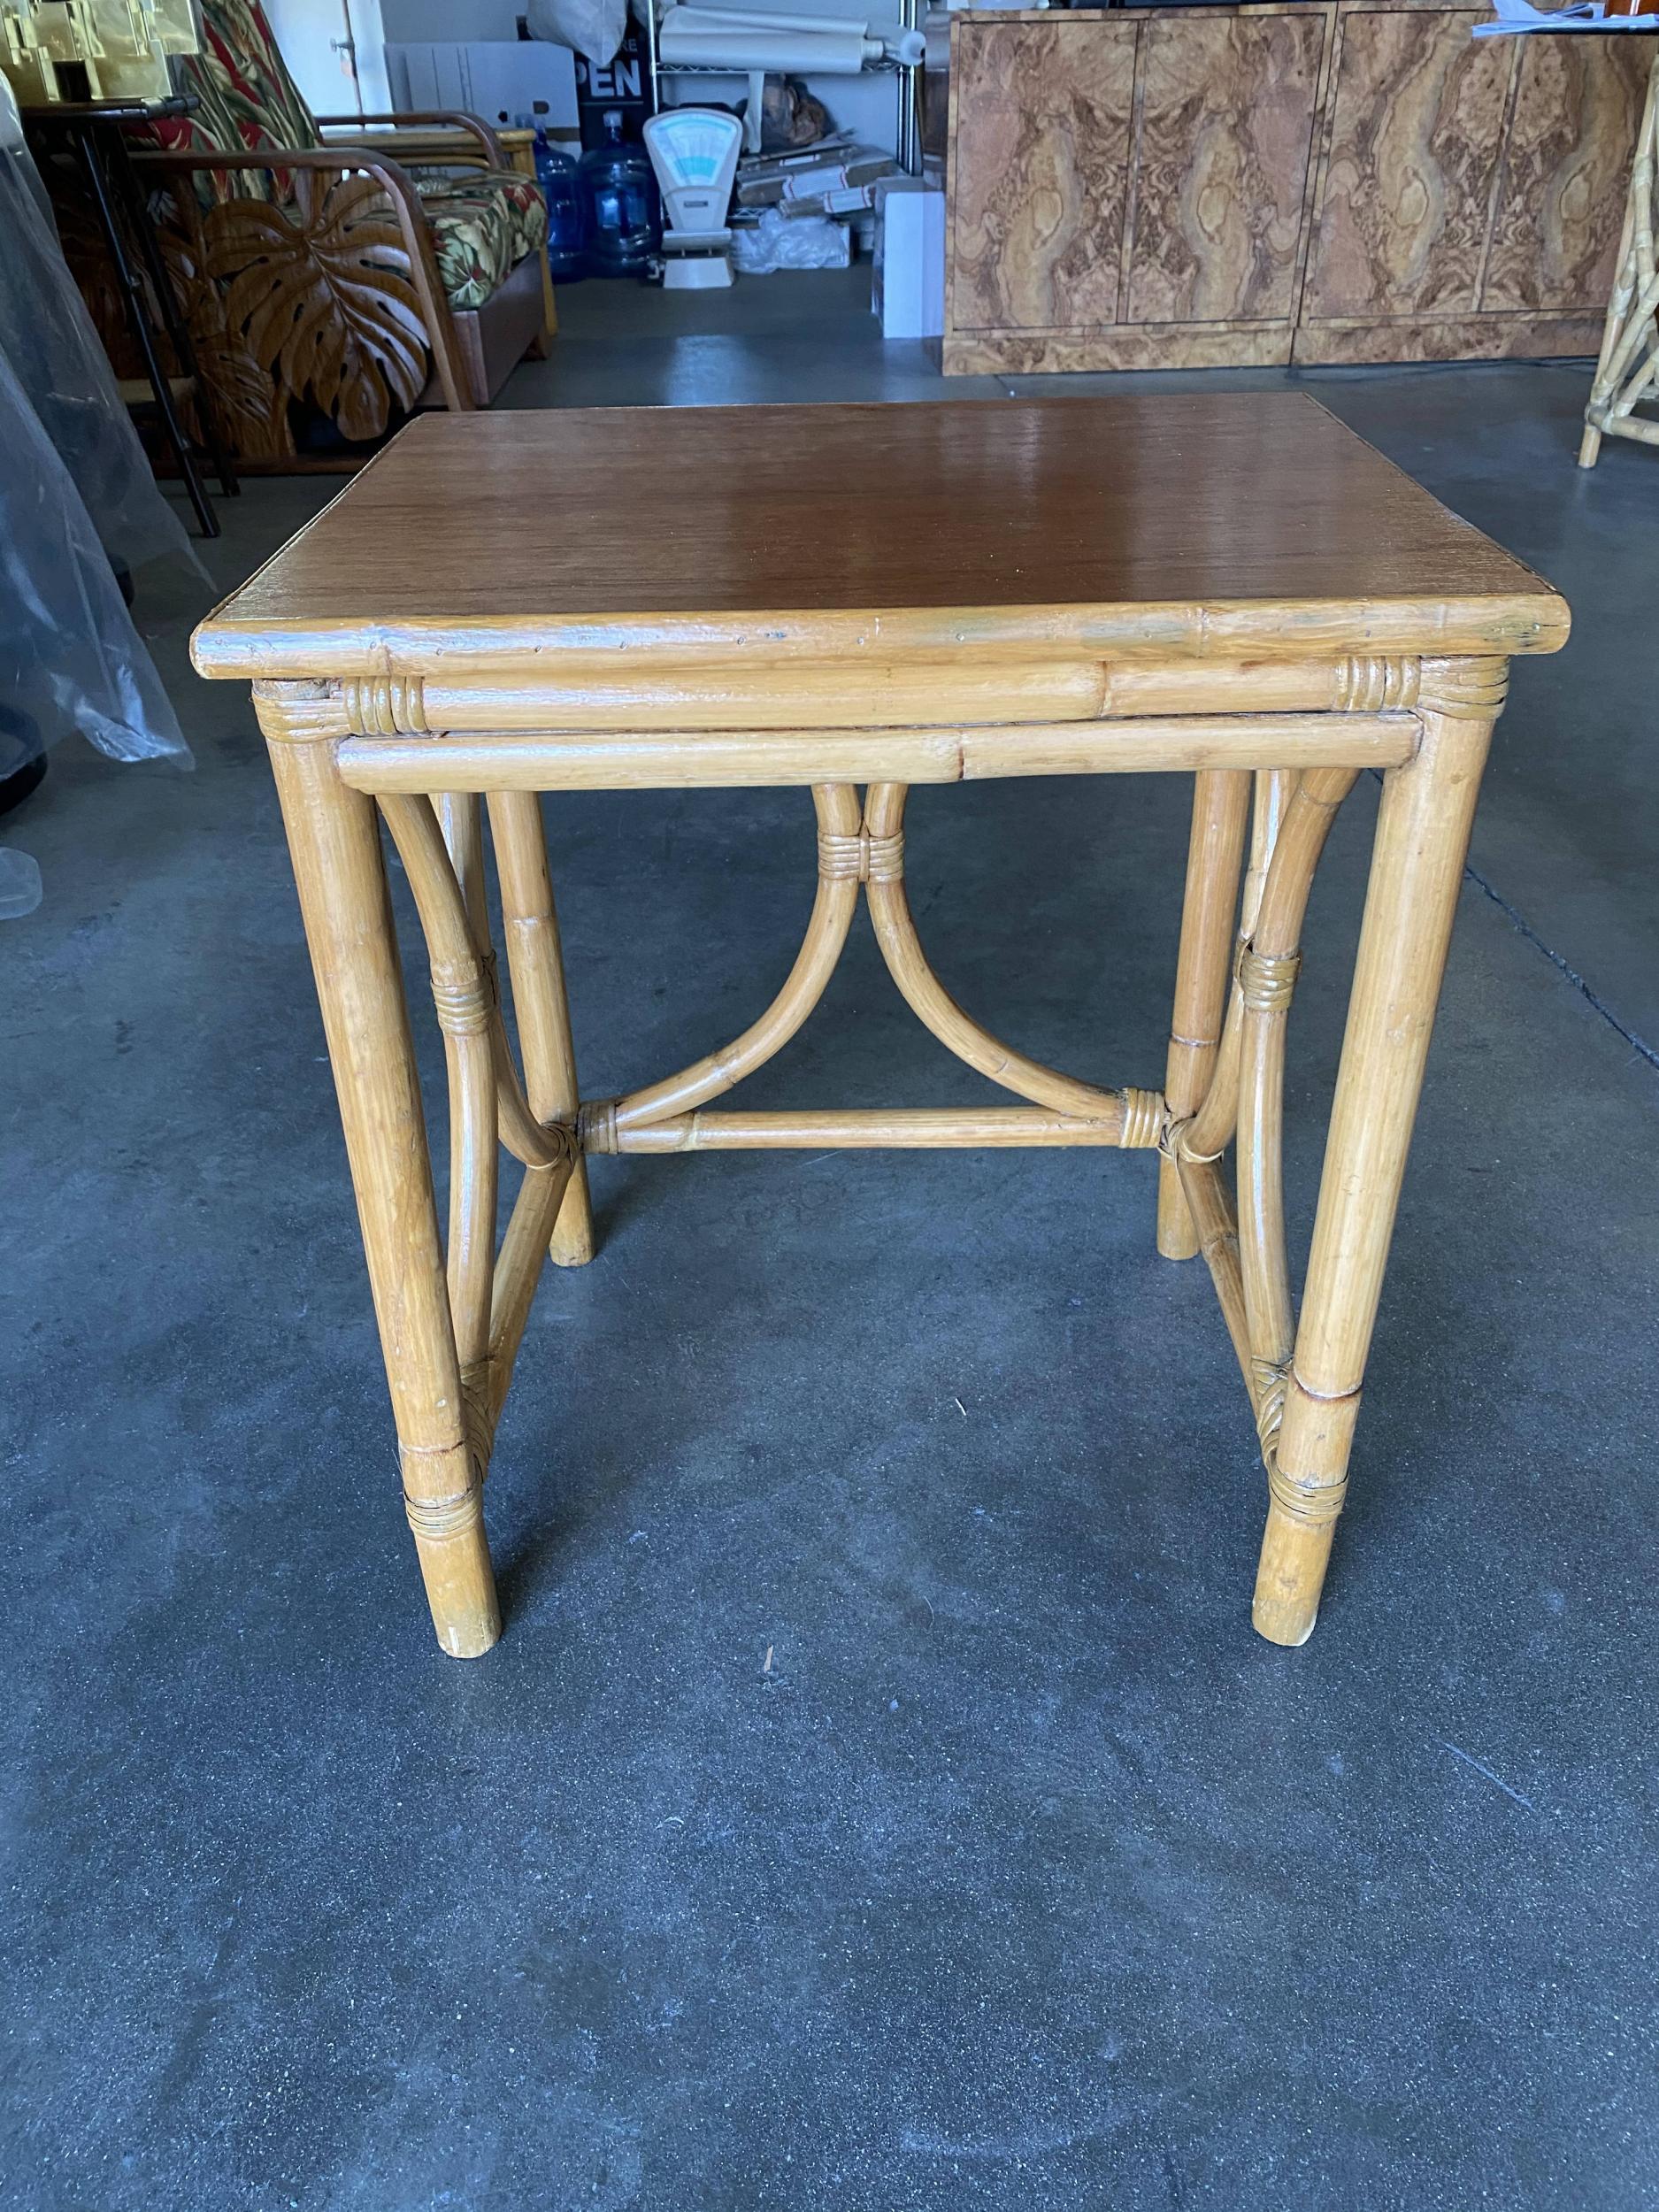 Mid-Century era rattan side table drink stand featuring a bent rattan structure with a mahogany tabletop. The table features a unique decorative 